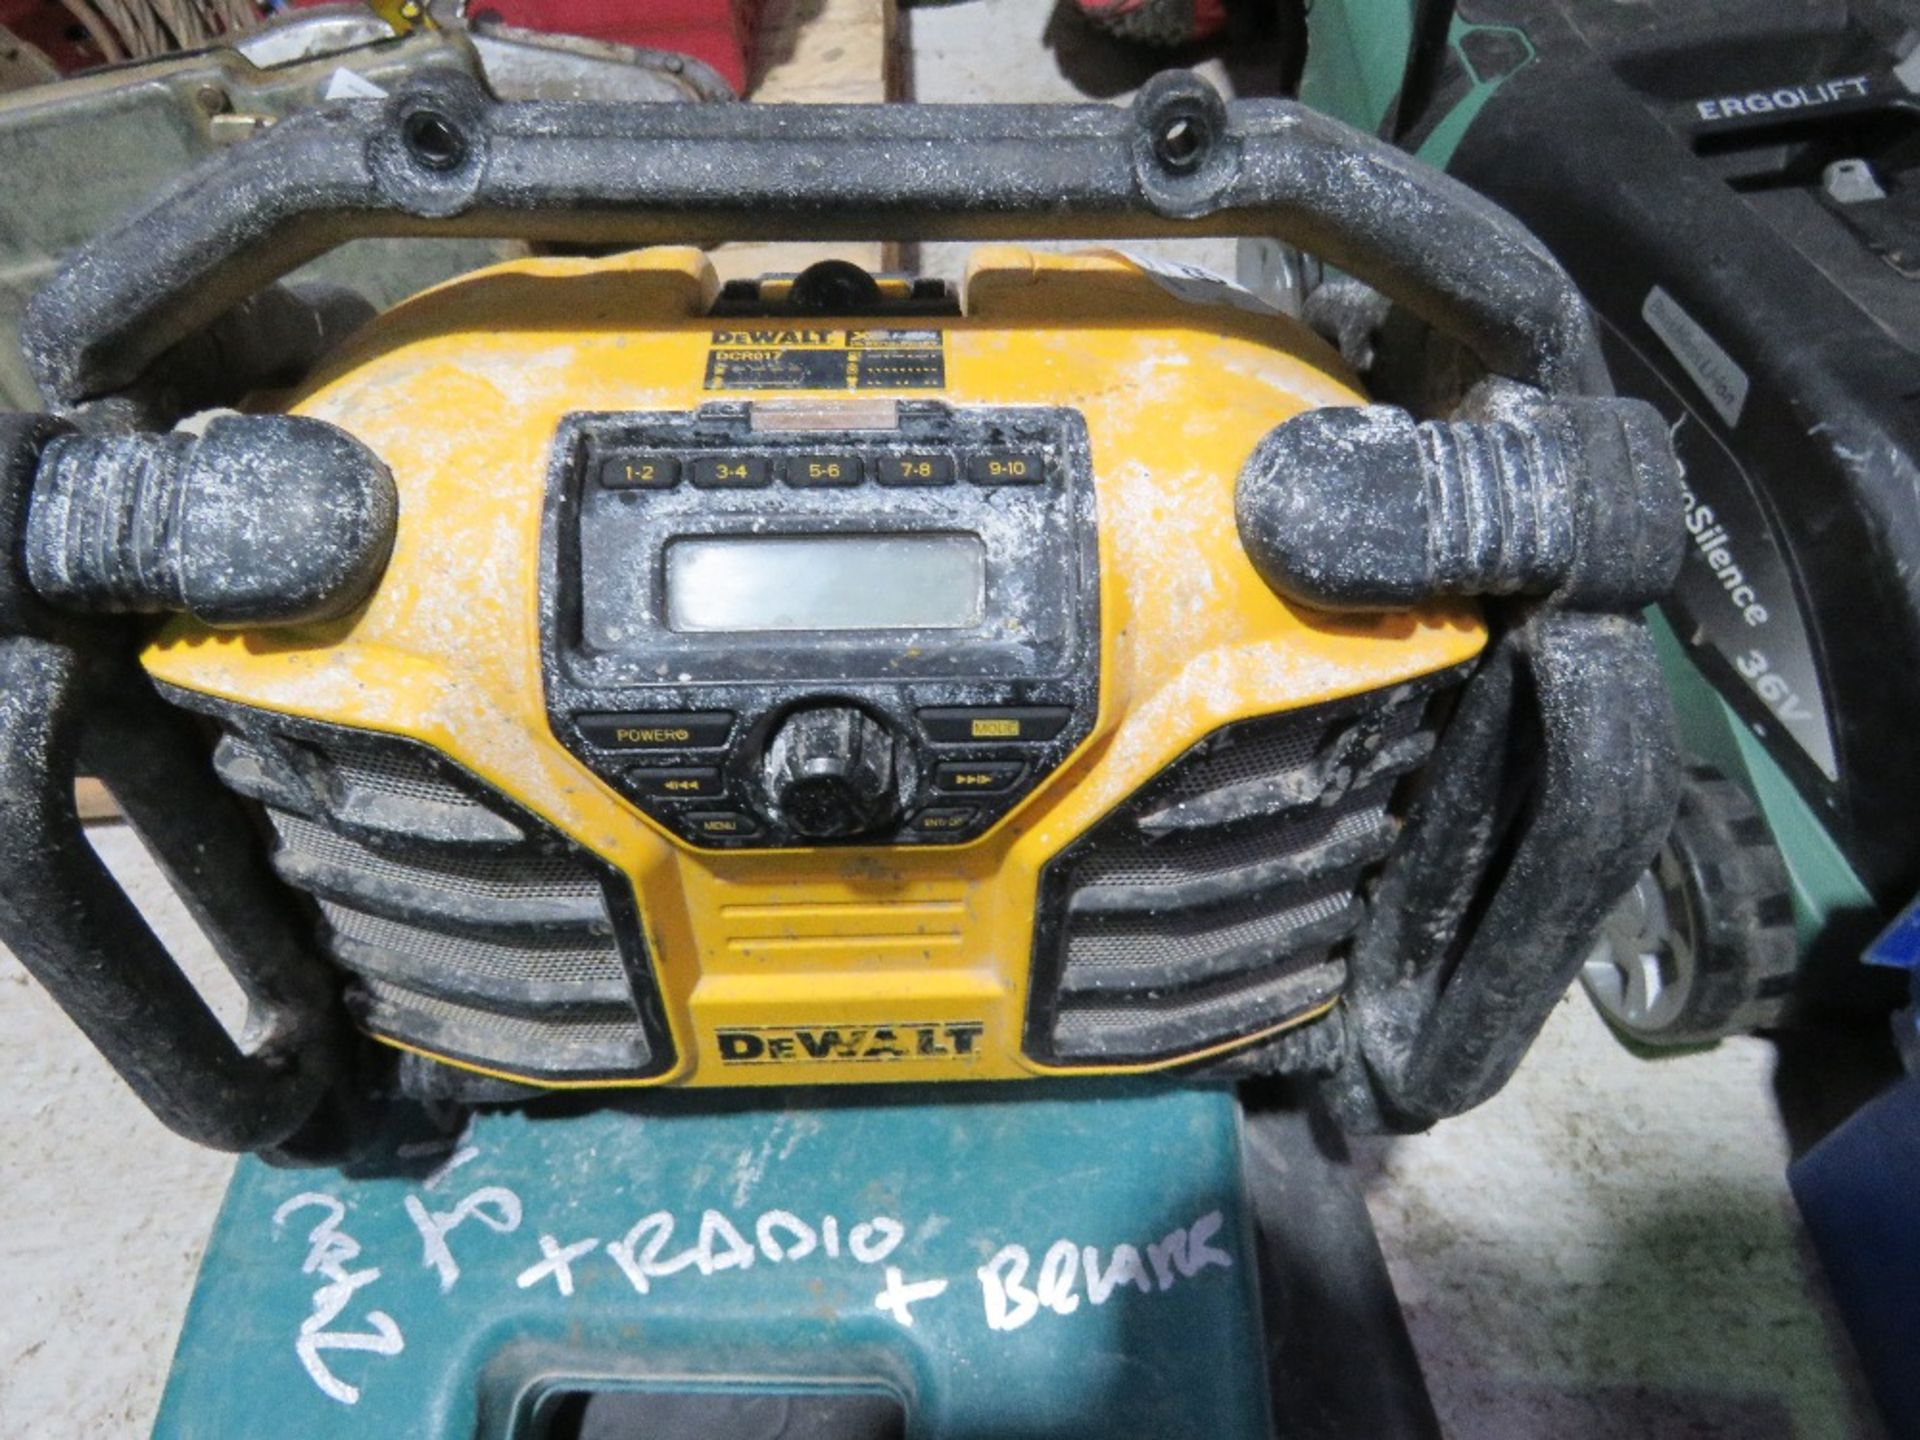 BREAKER 240VOLT PLUS A JIG SAW AND DEWALT RADIO.....THIS LOT IS SOLD UNDER THE AUCTIONEERS MARGIN SC